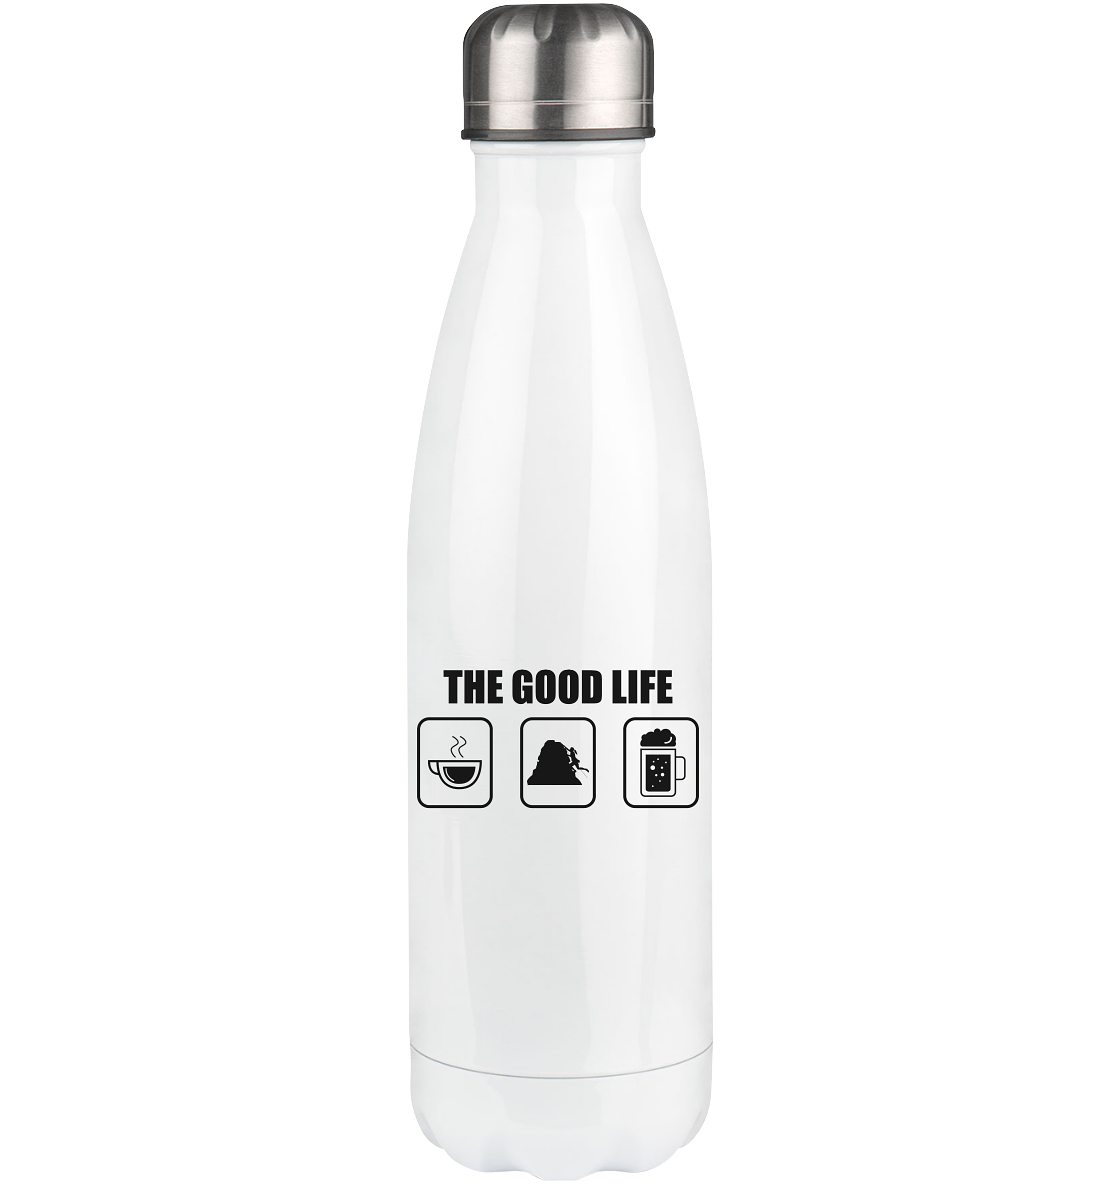 The Good Life 1 - Edelstahl Thermosflasche klettern 500ml